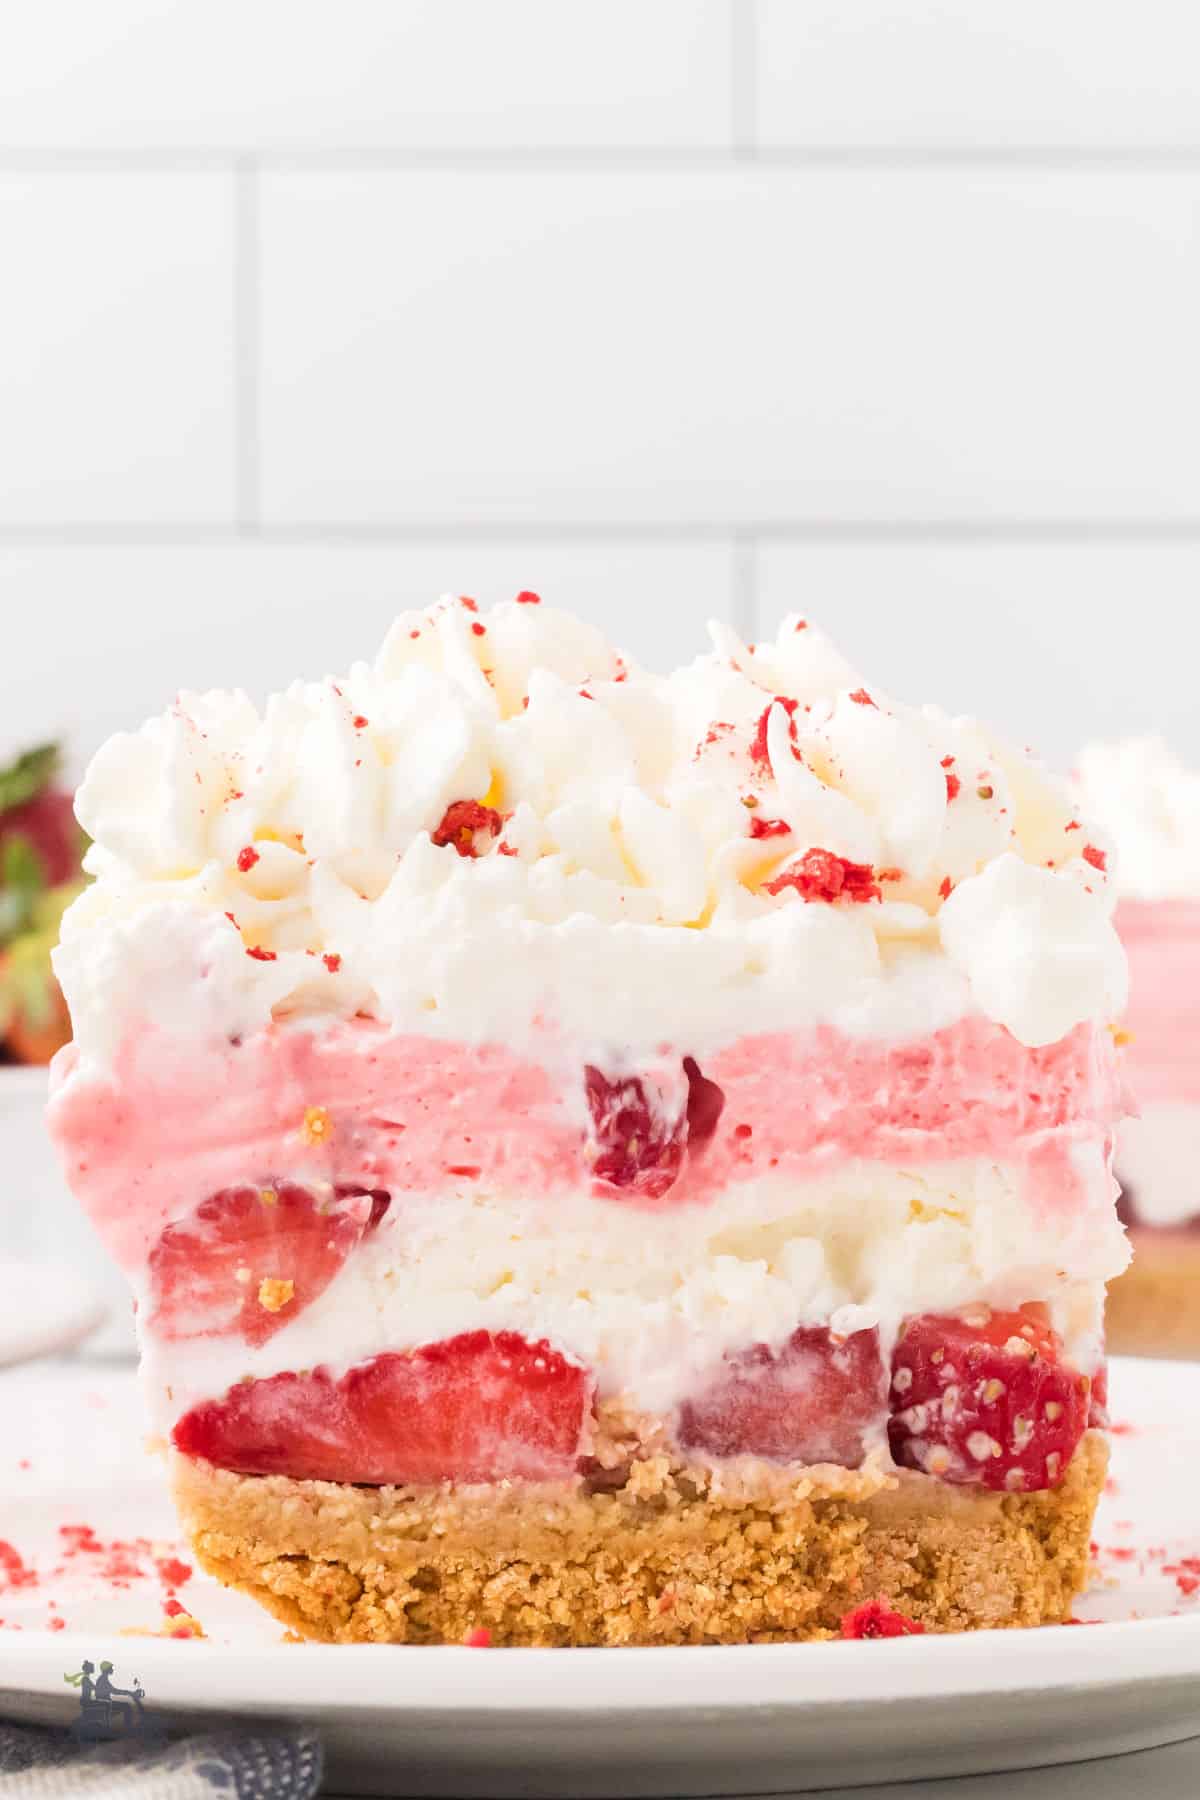 A fruity, no-bake dessert made with strawberries, whipped cream, jello, and cream cheese. 